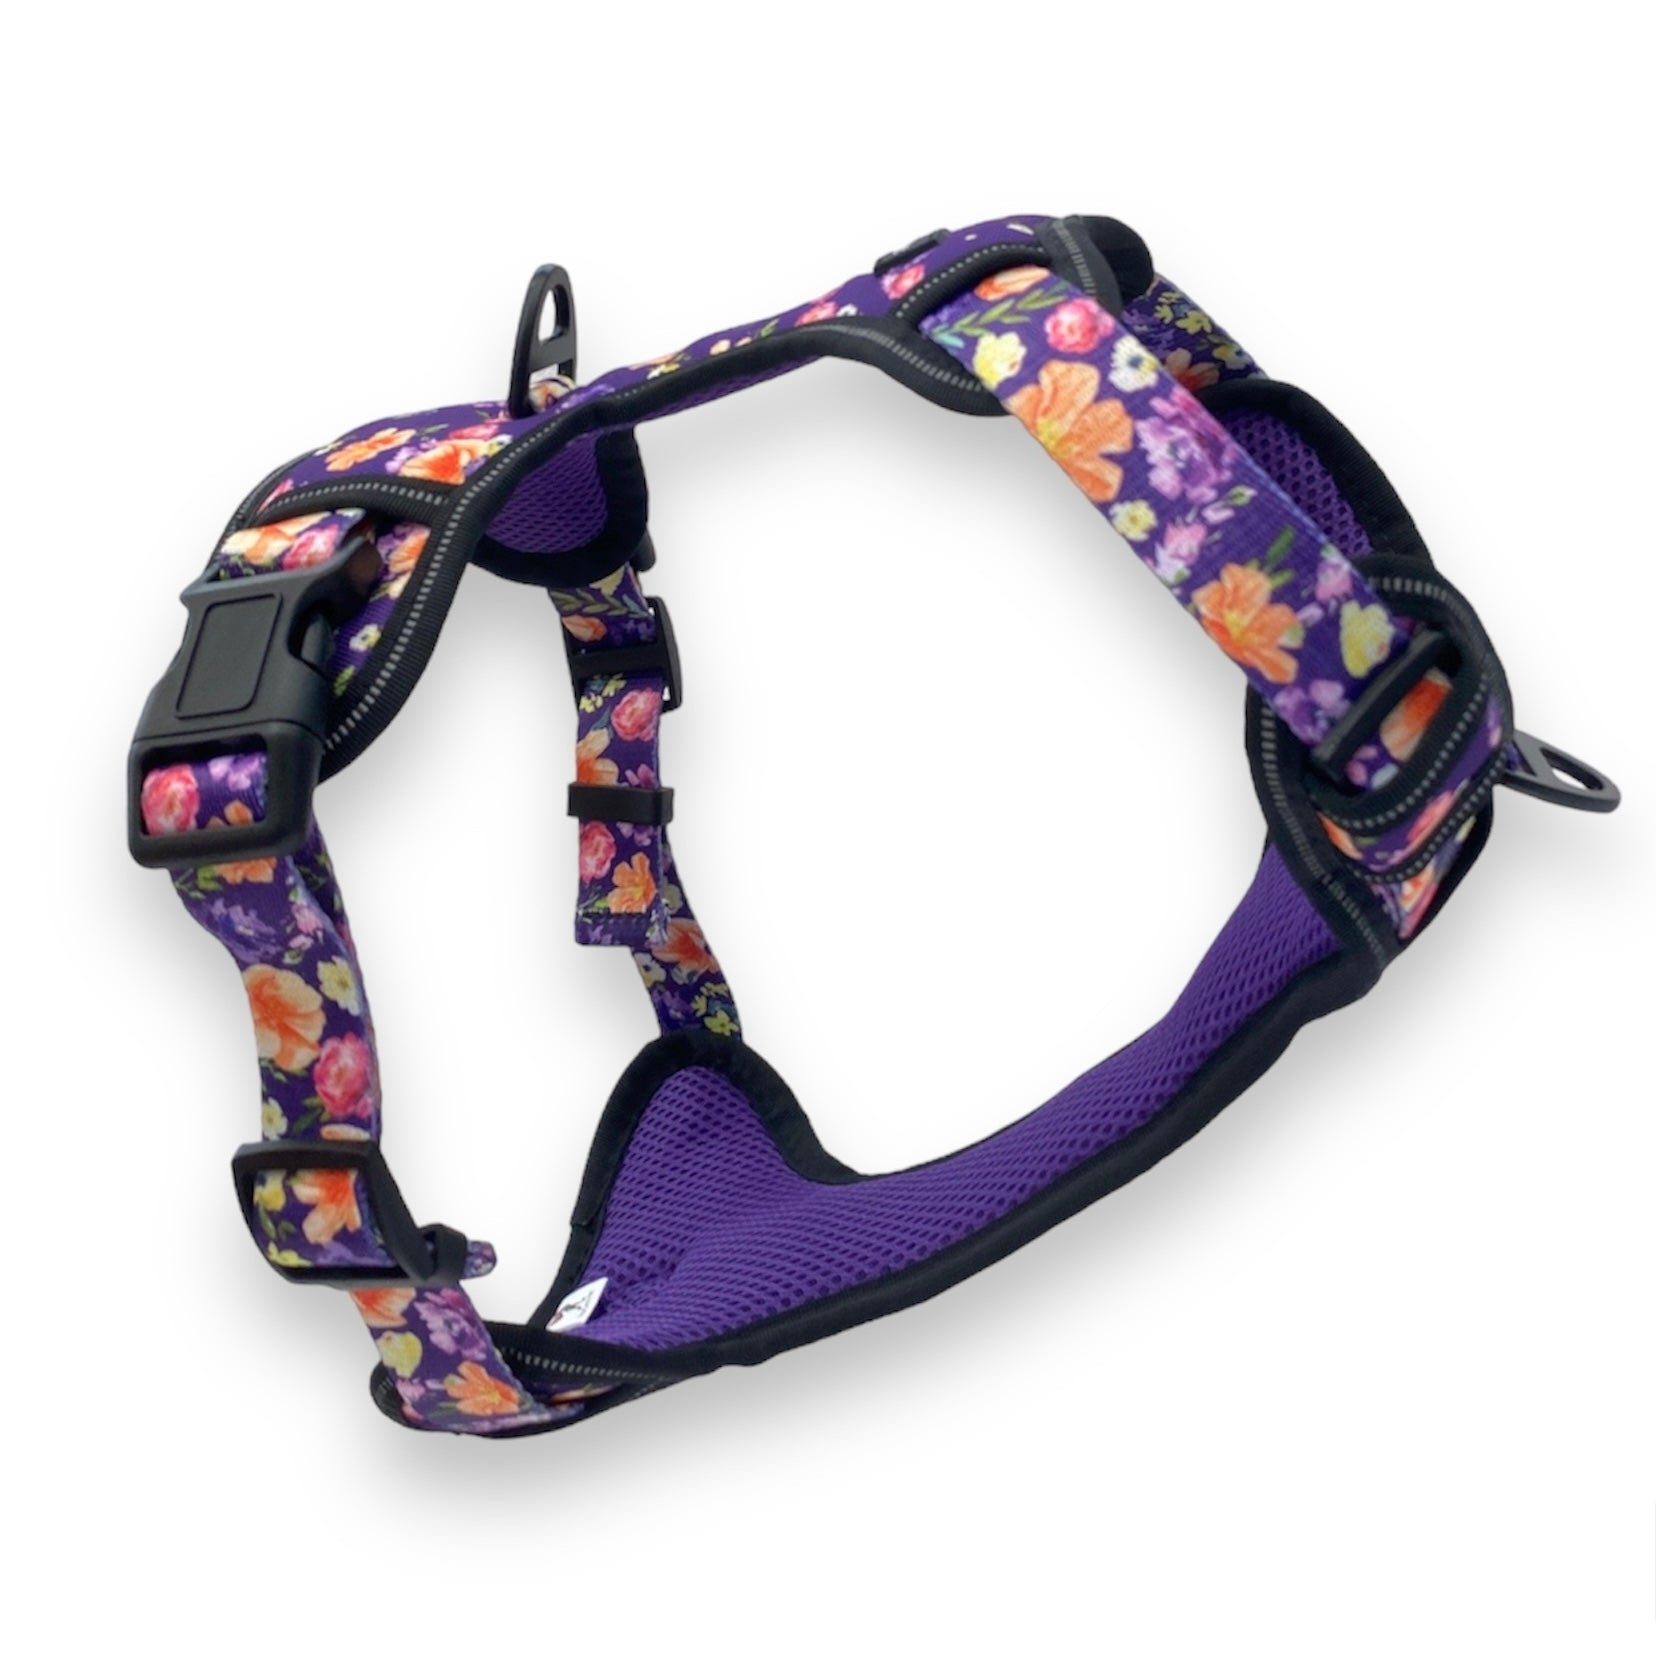 a 3D image of a no pull dog harness for medium sized dog from fearless pet in a purple floral print